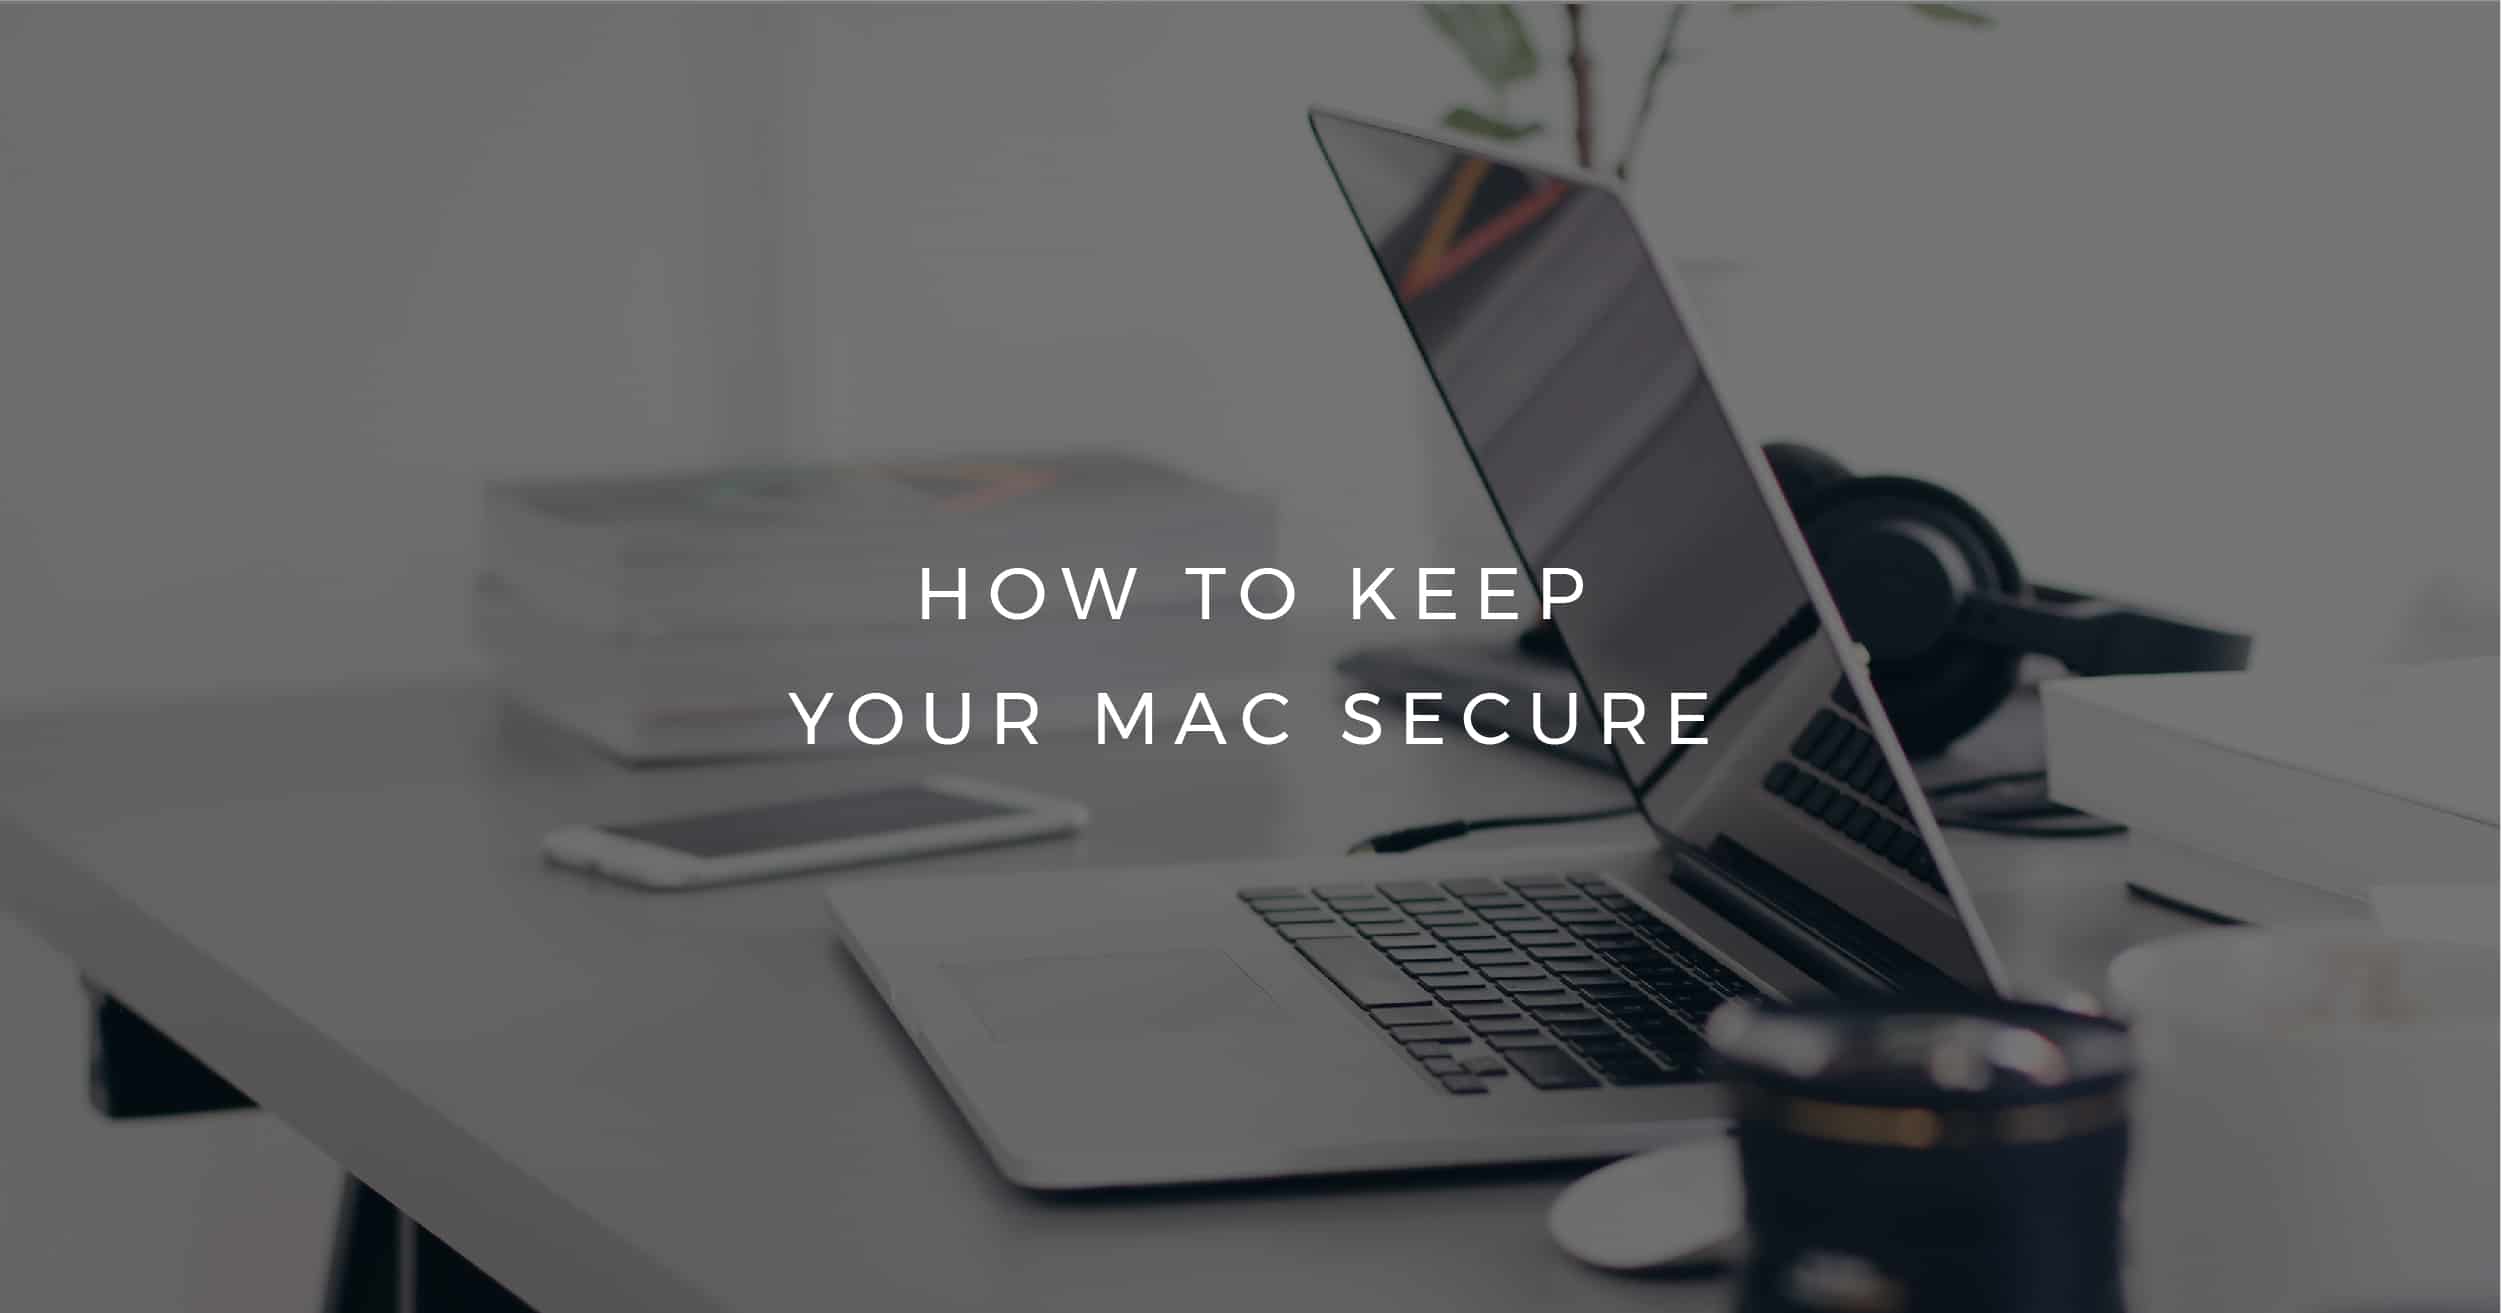 How to keep your Mac secure